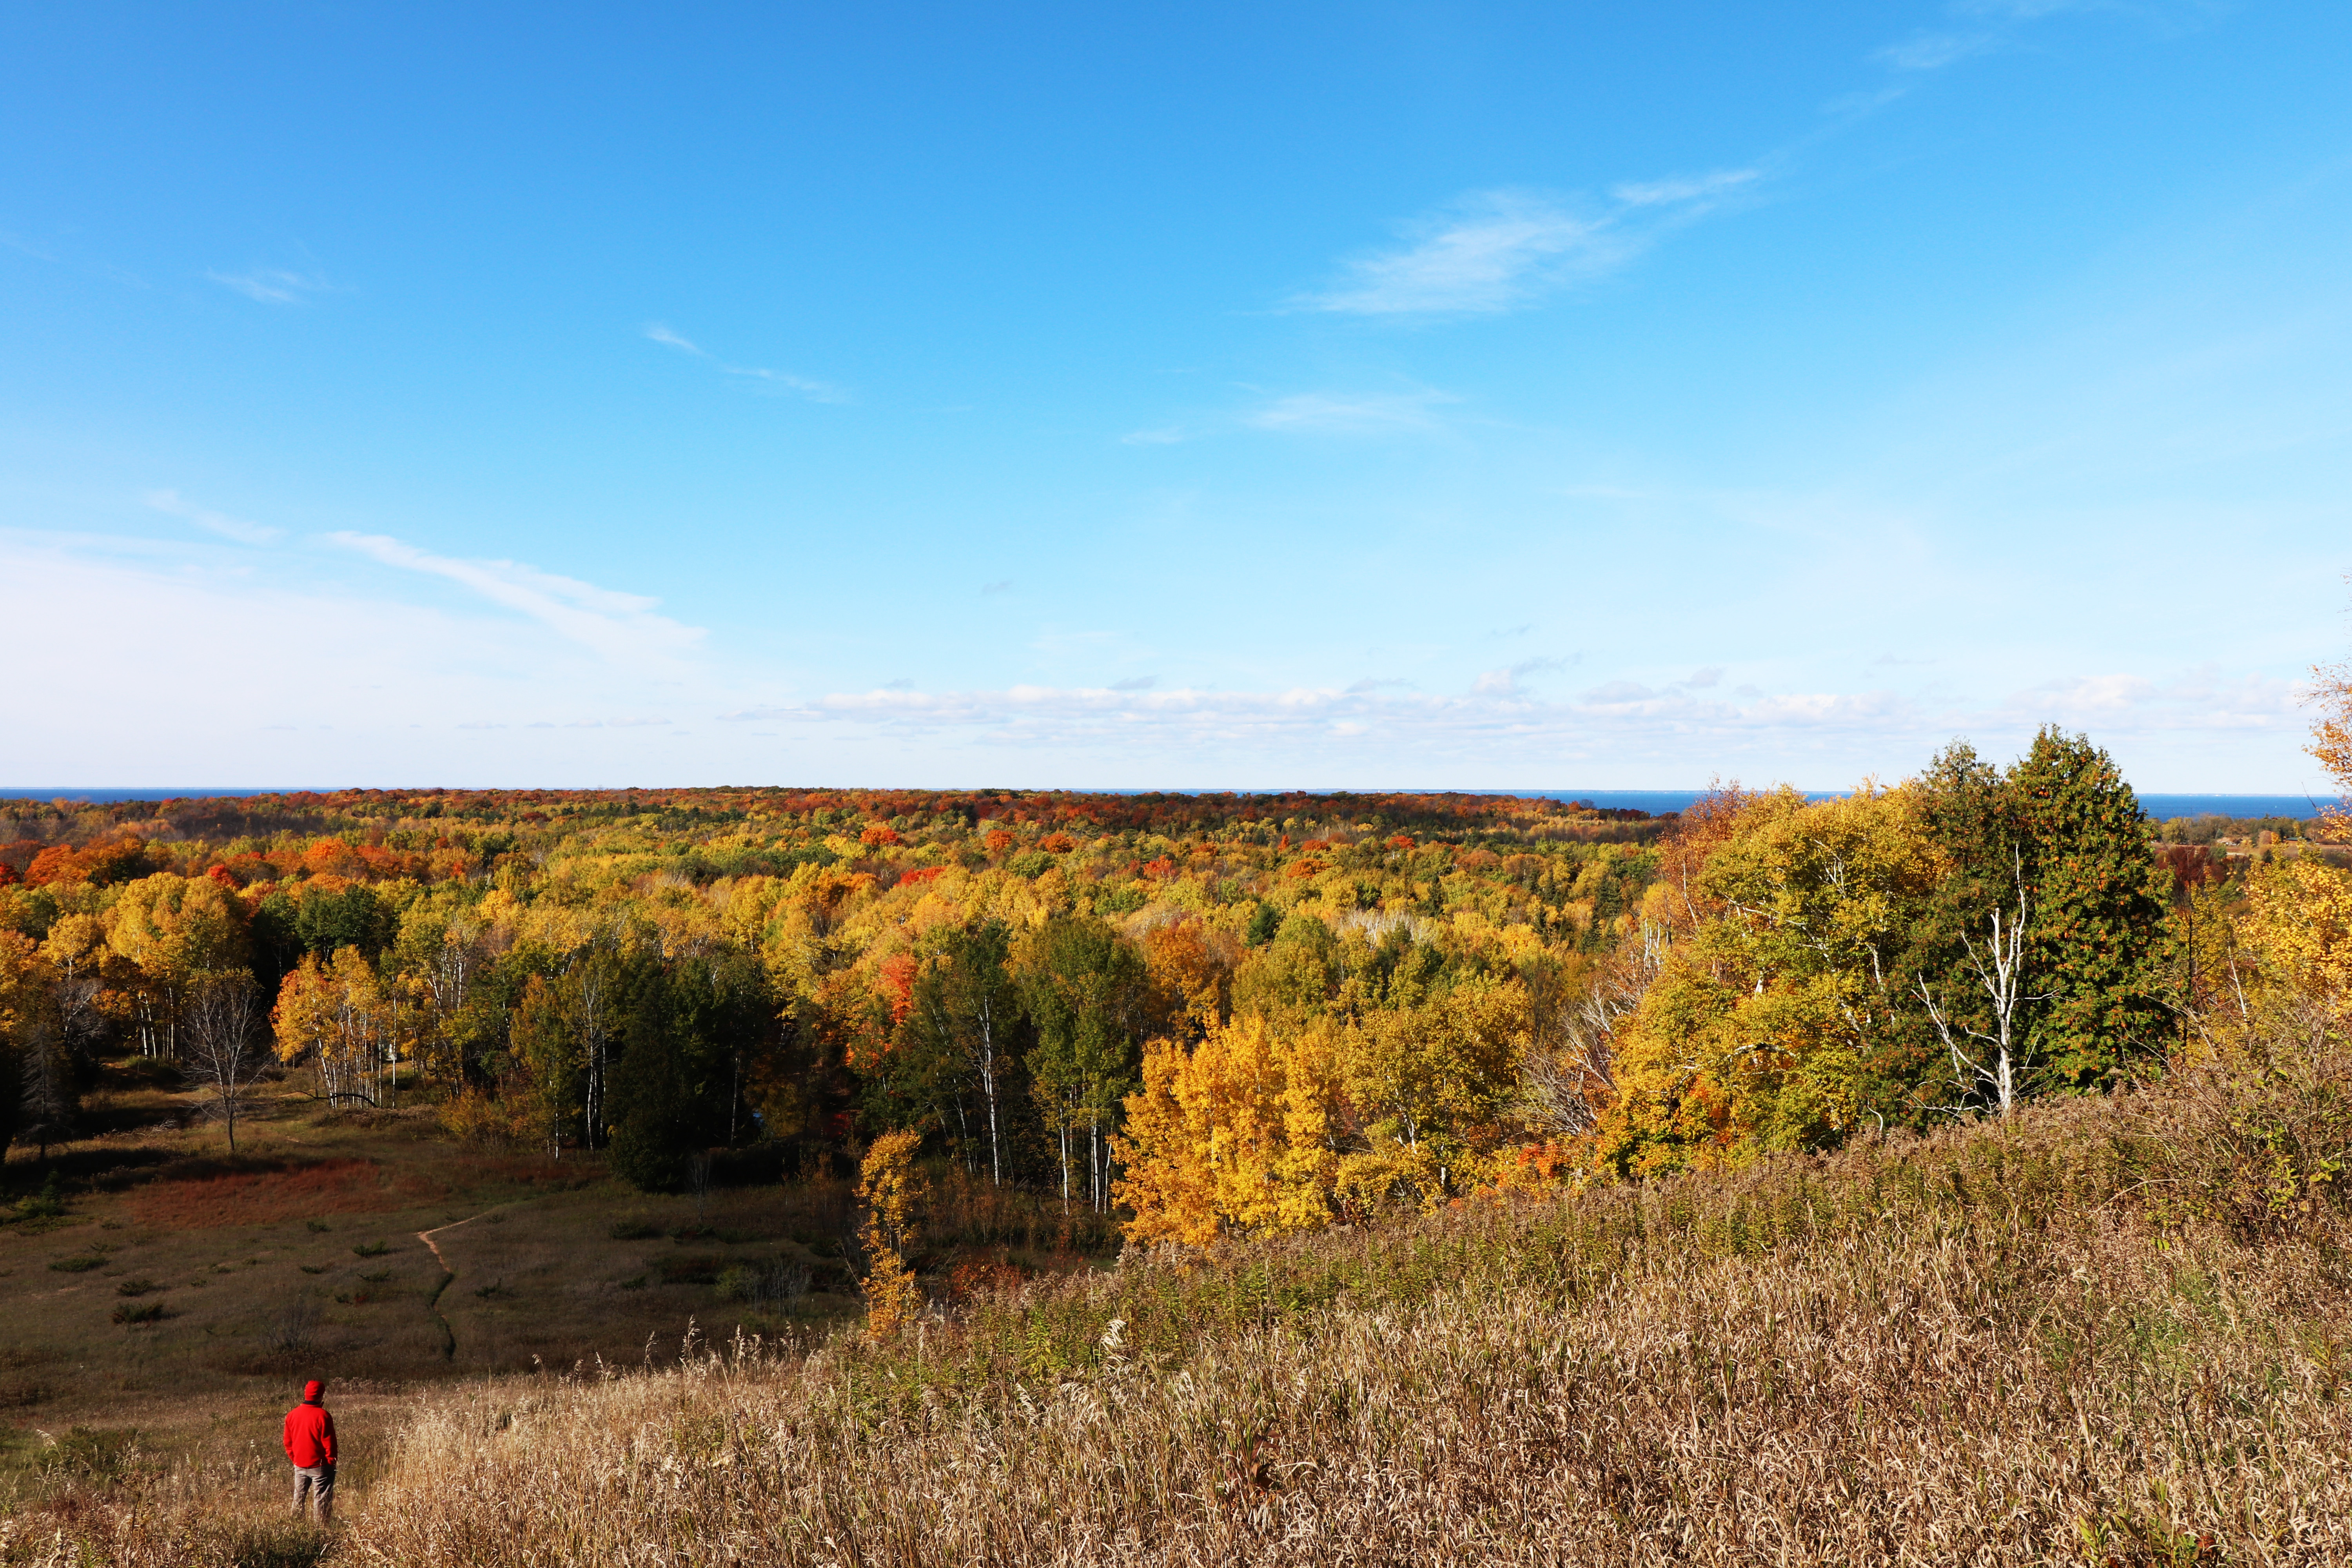 A sweeping view of the park drenched in fall color.